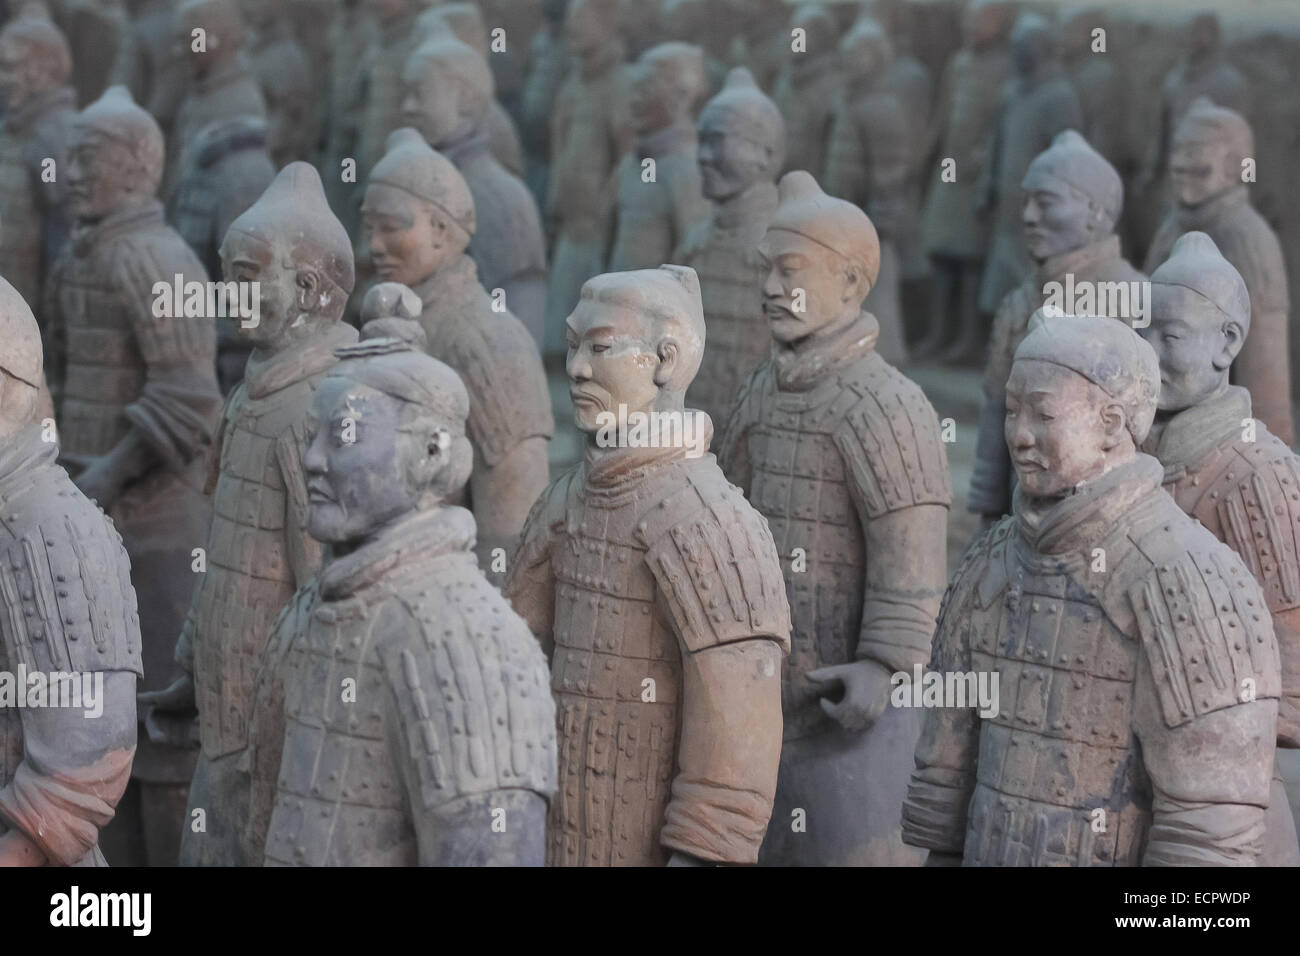 soldiers of the Terracotta Army, Mausoleum of the First Qin Emperor, Xian; Xi an; plenty; ancient warriors; art; sculptur; china; The Terracotta Warriors Stock Photo